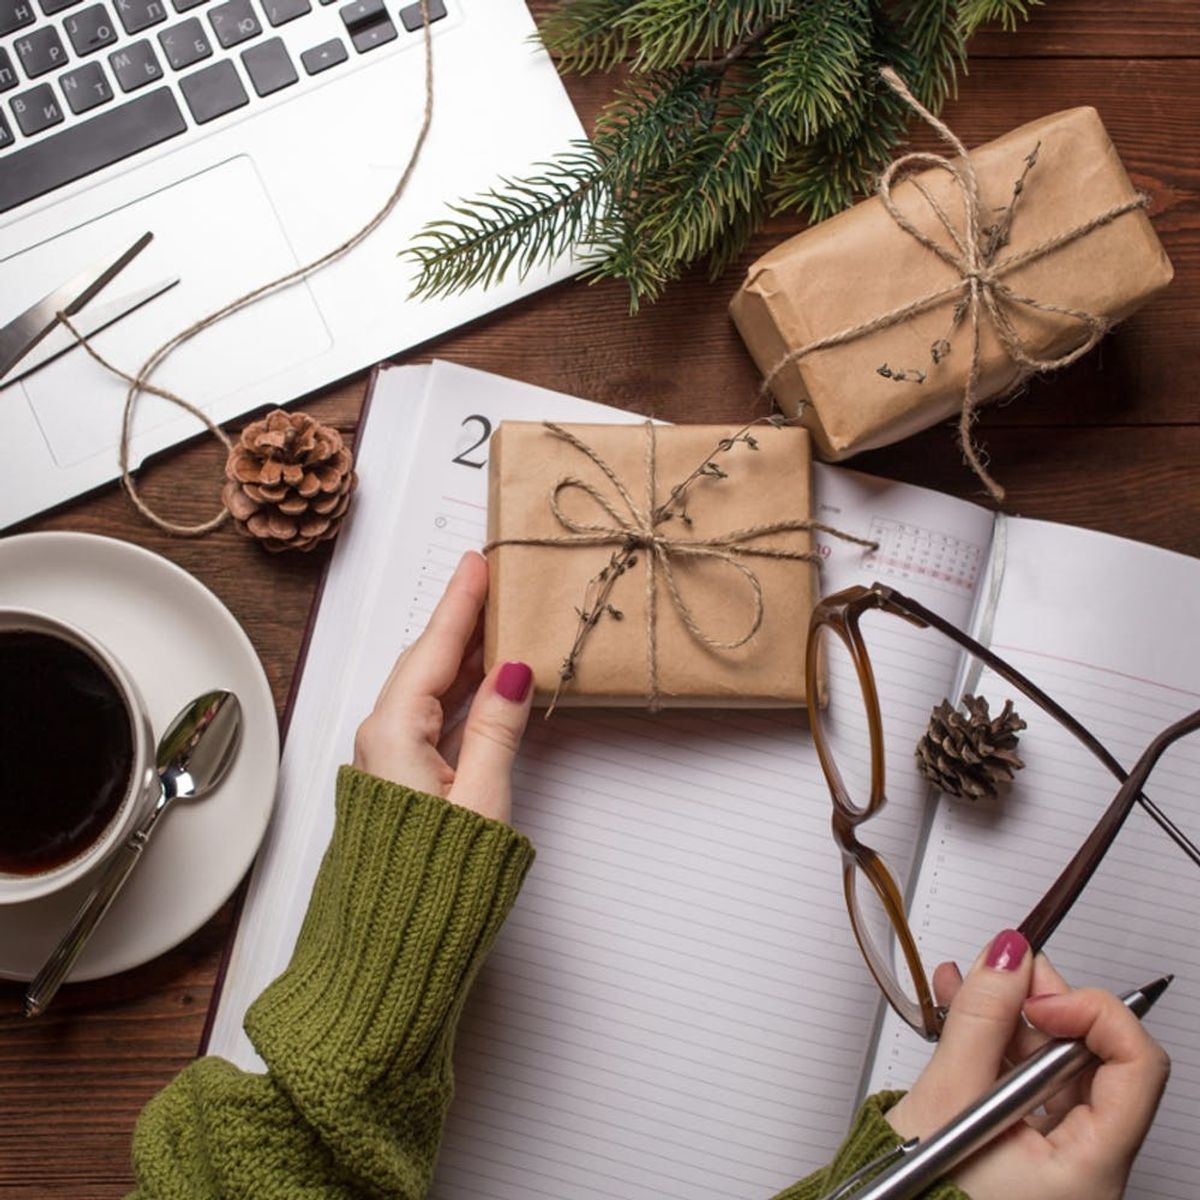 How to Give Your Coworkers Holiday Gifts Without Making It Awkward